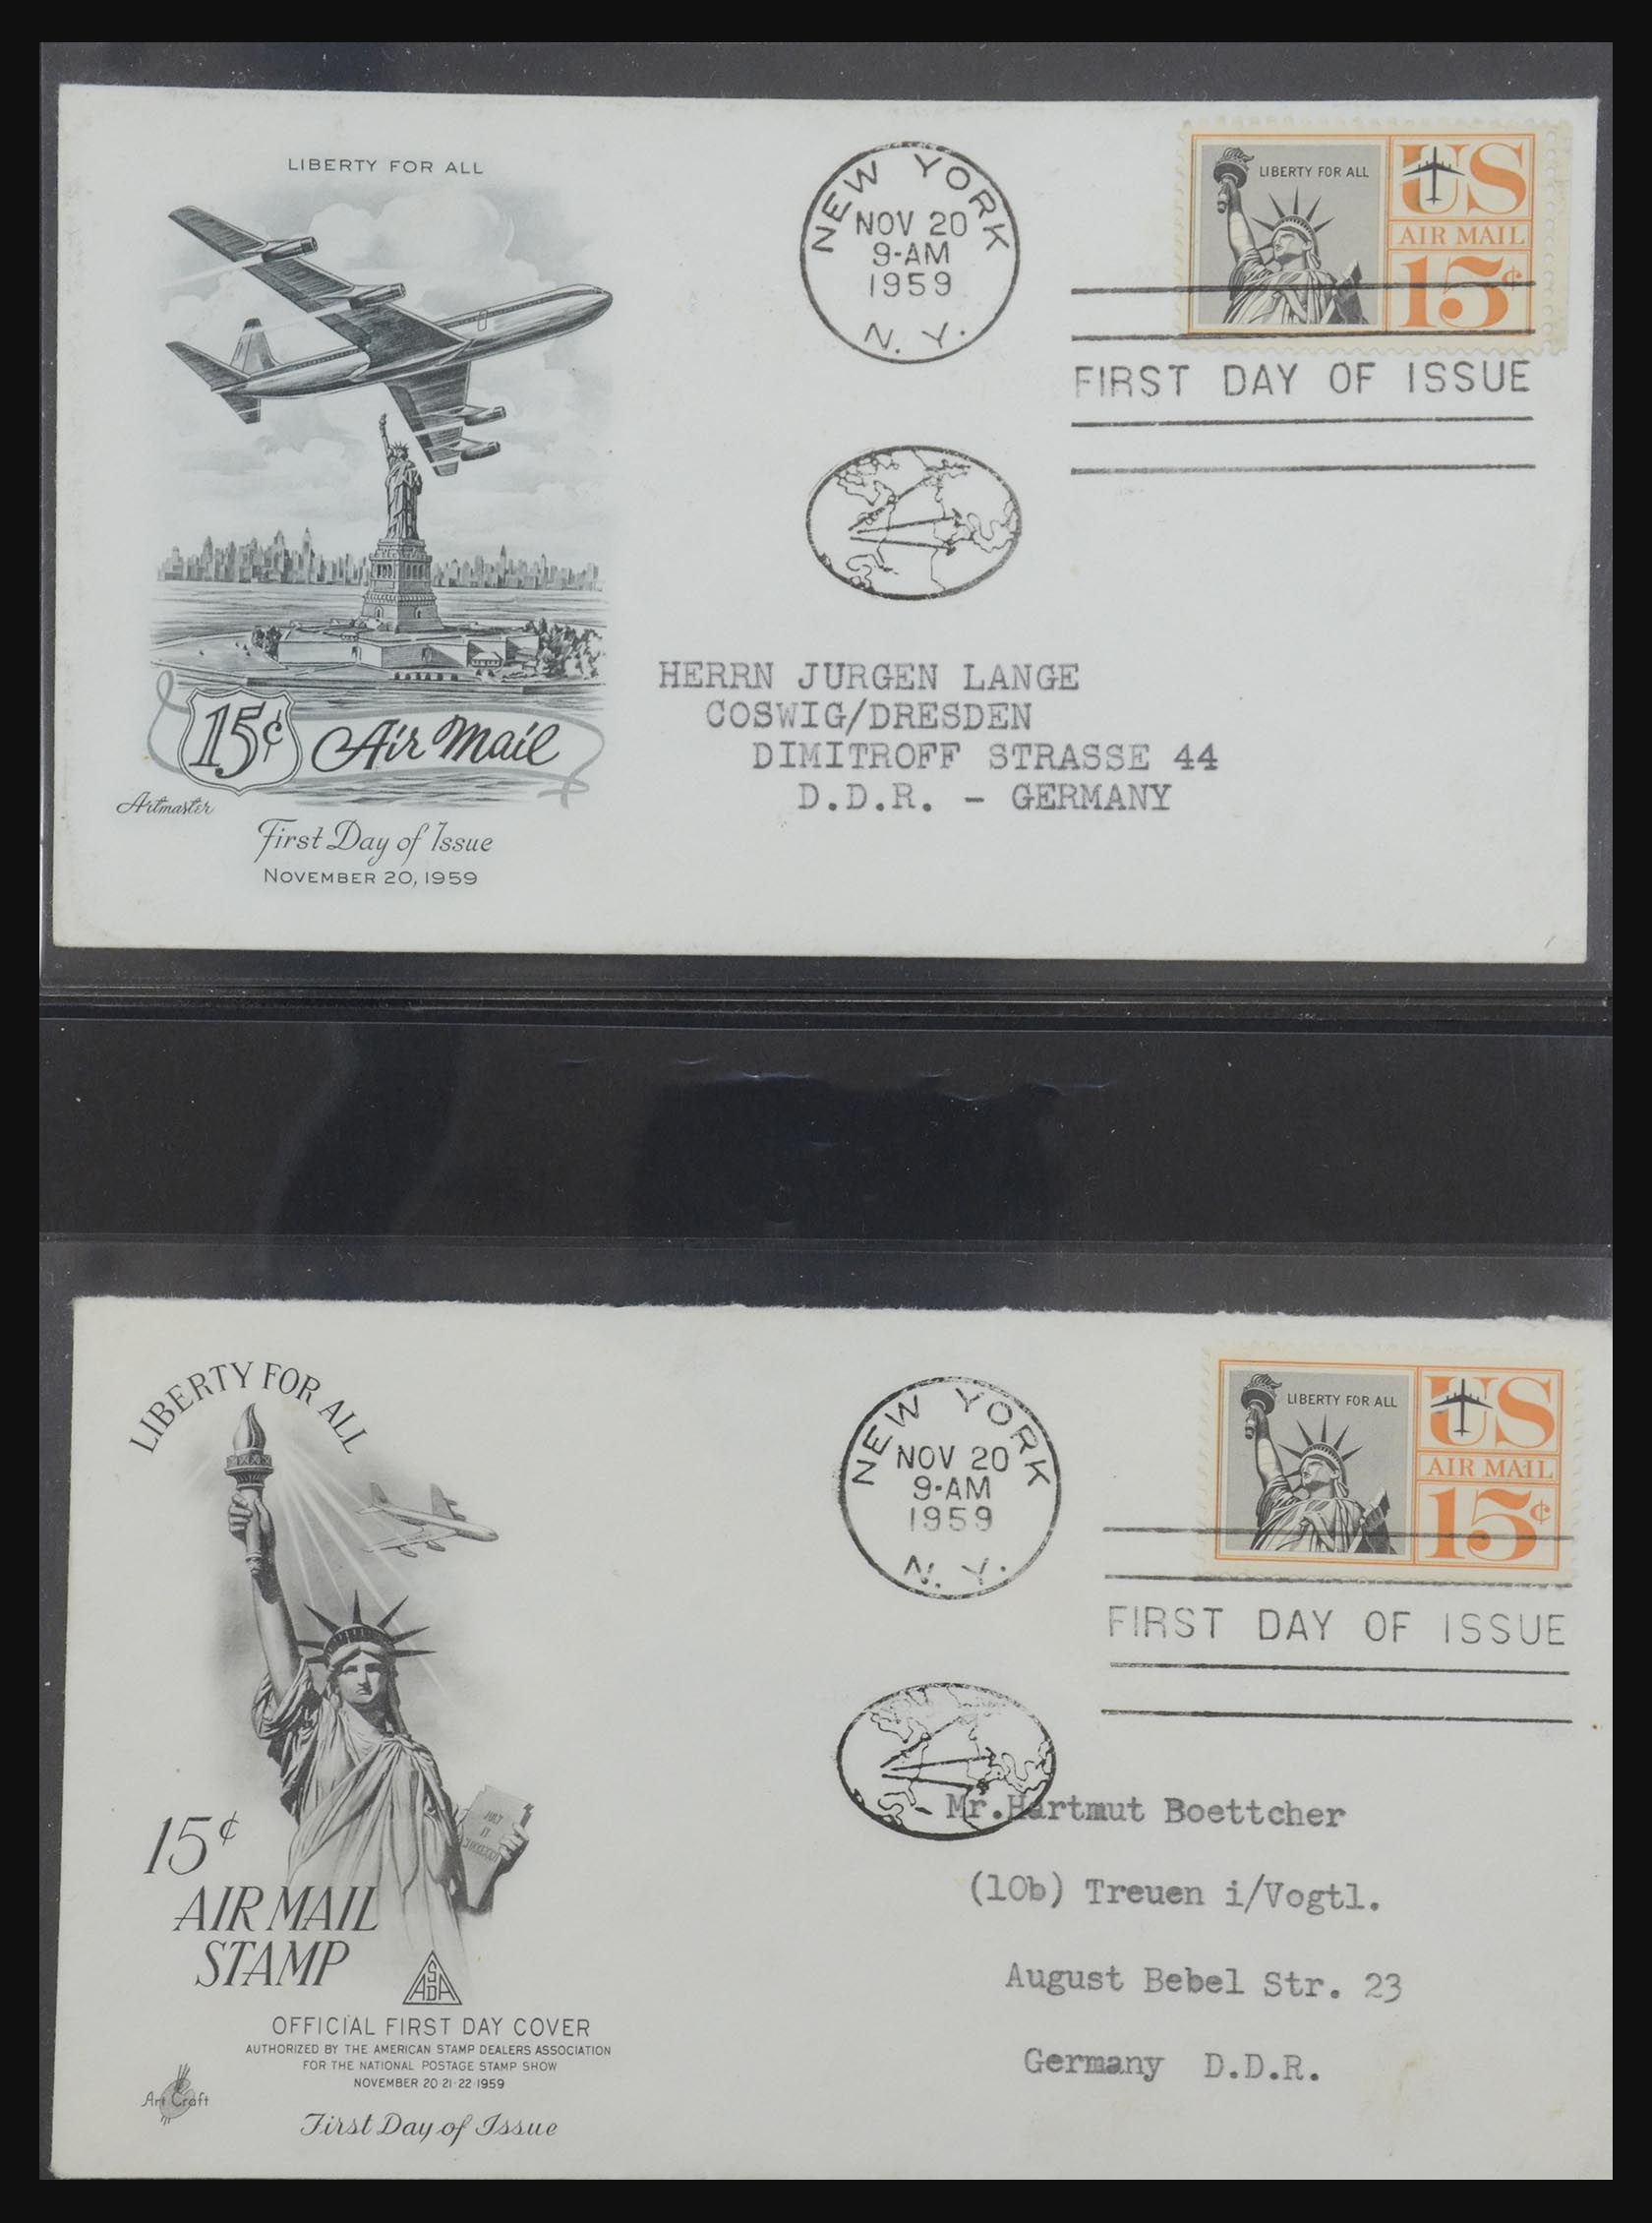 31913 0031 - 31913 USA first day cover collection 1945-1990.